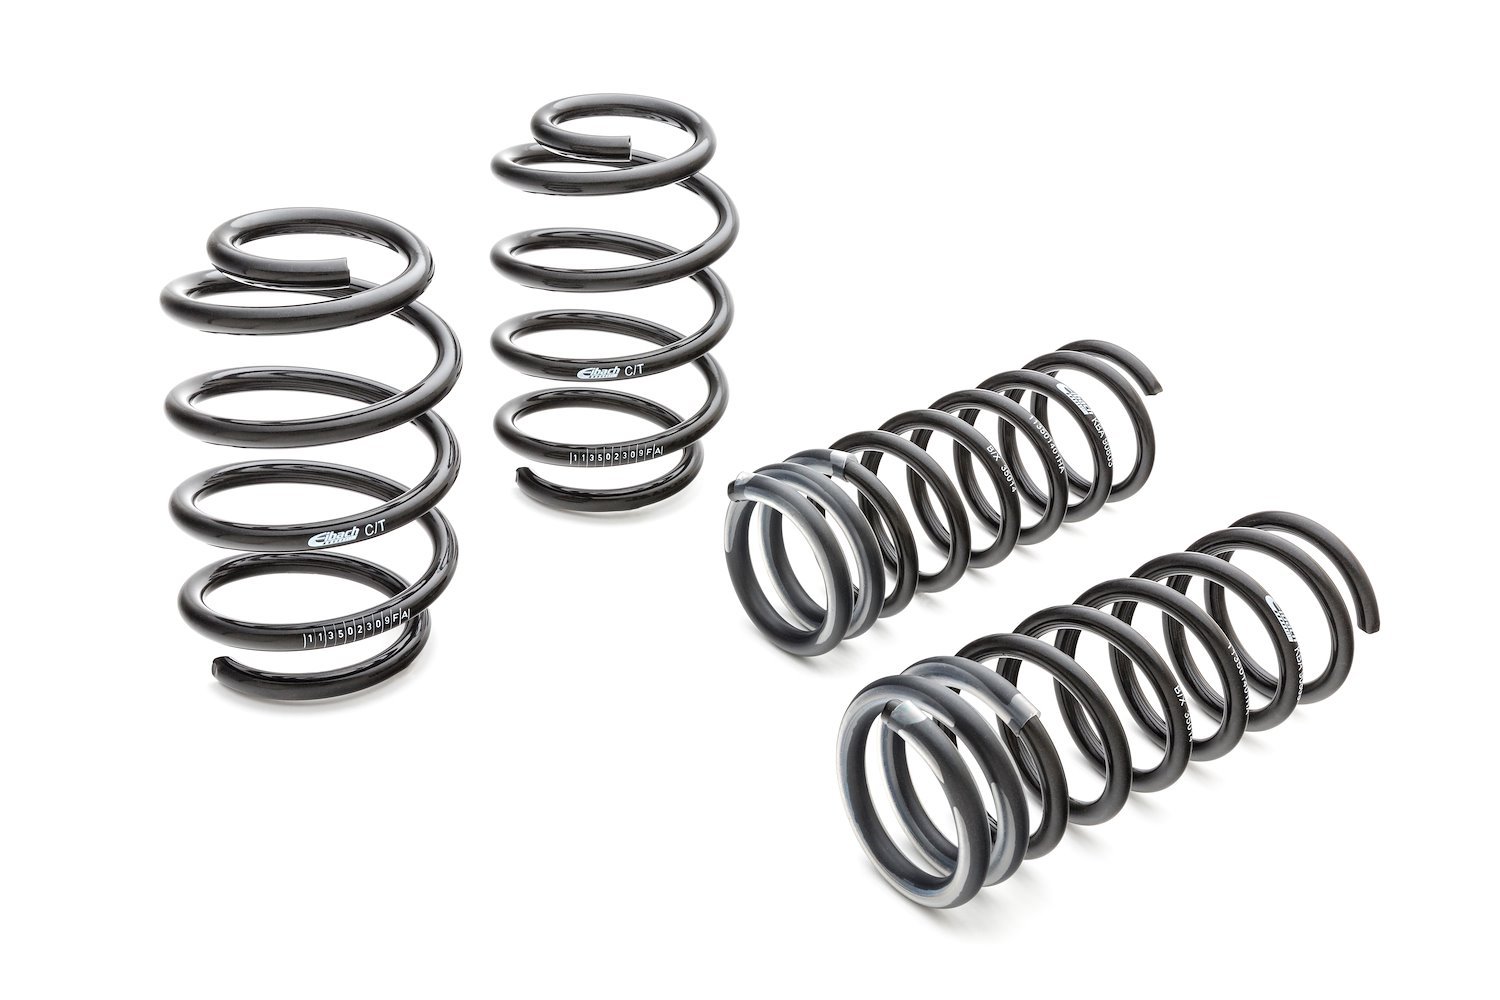 4044.140 Pro-Kit Lowering Springs 2003-2005 Accord V6 - 1.200 in. Front/1.300 in. Rear Drop